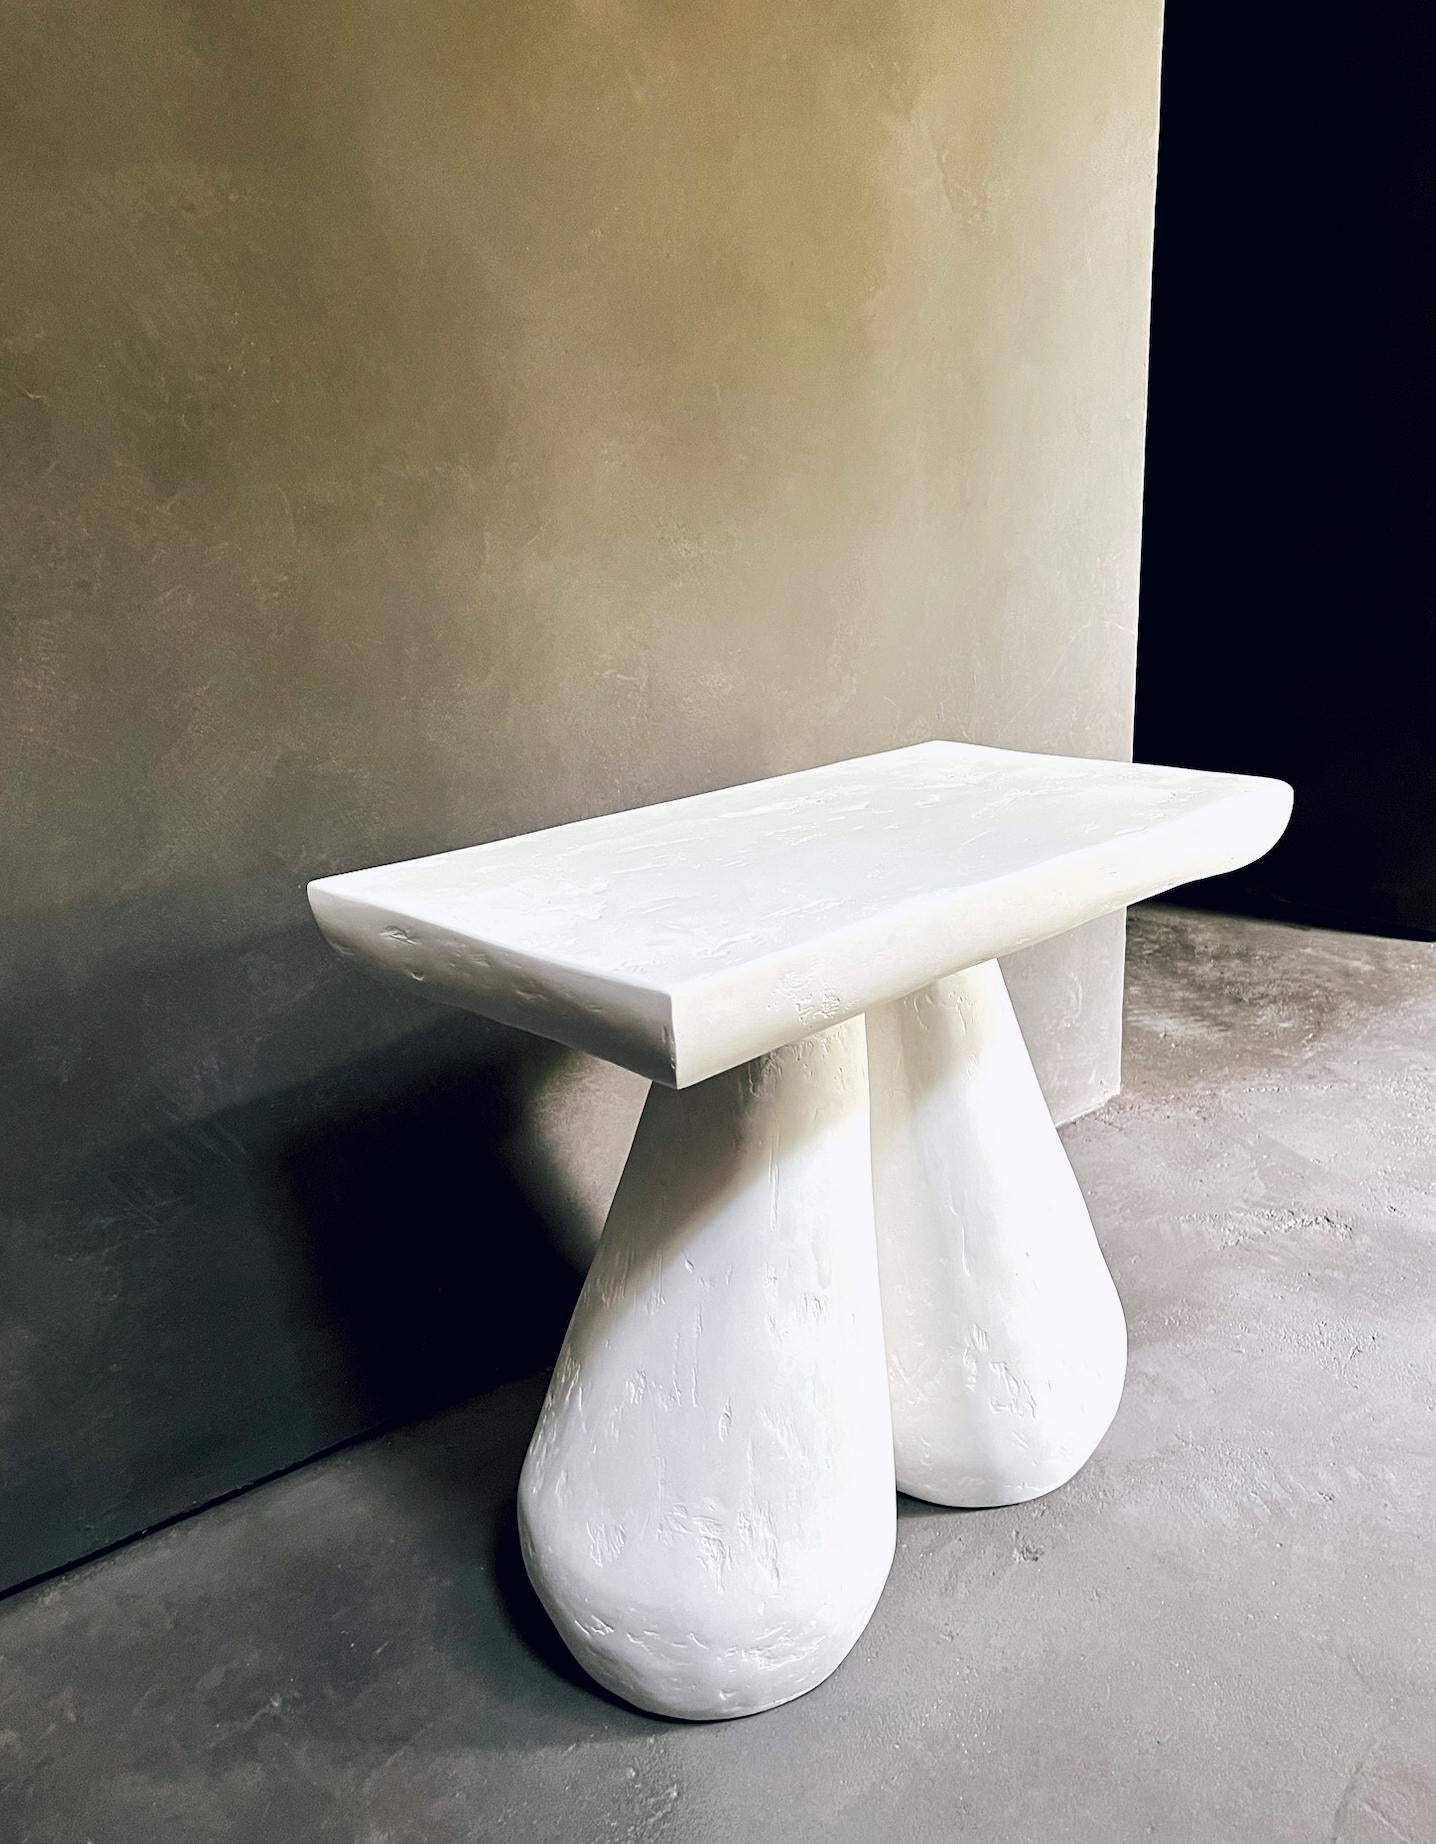 Plaster Erika Mini Table REP by Tuleste Factory For Sale